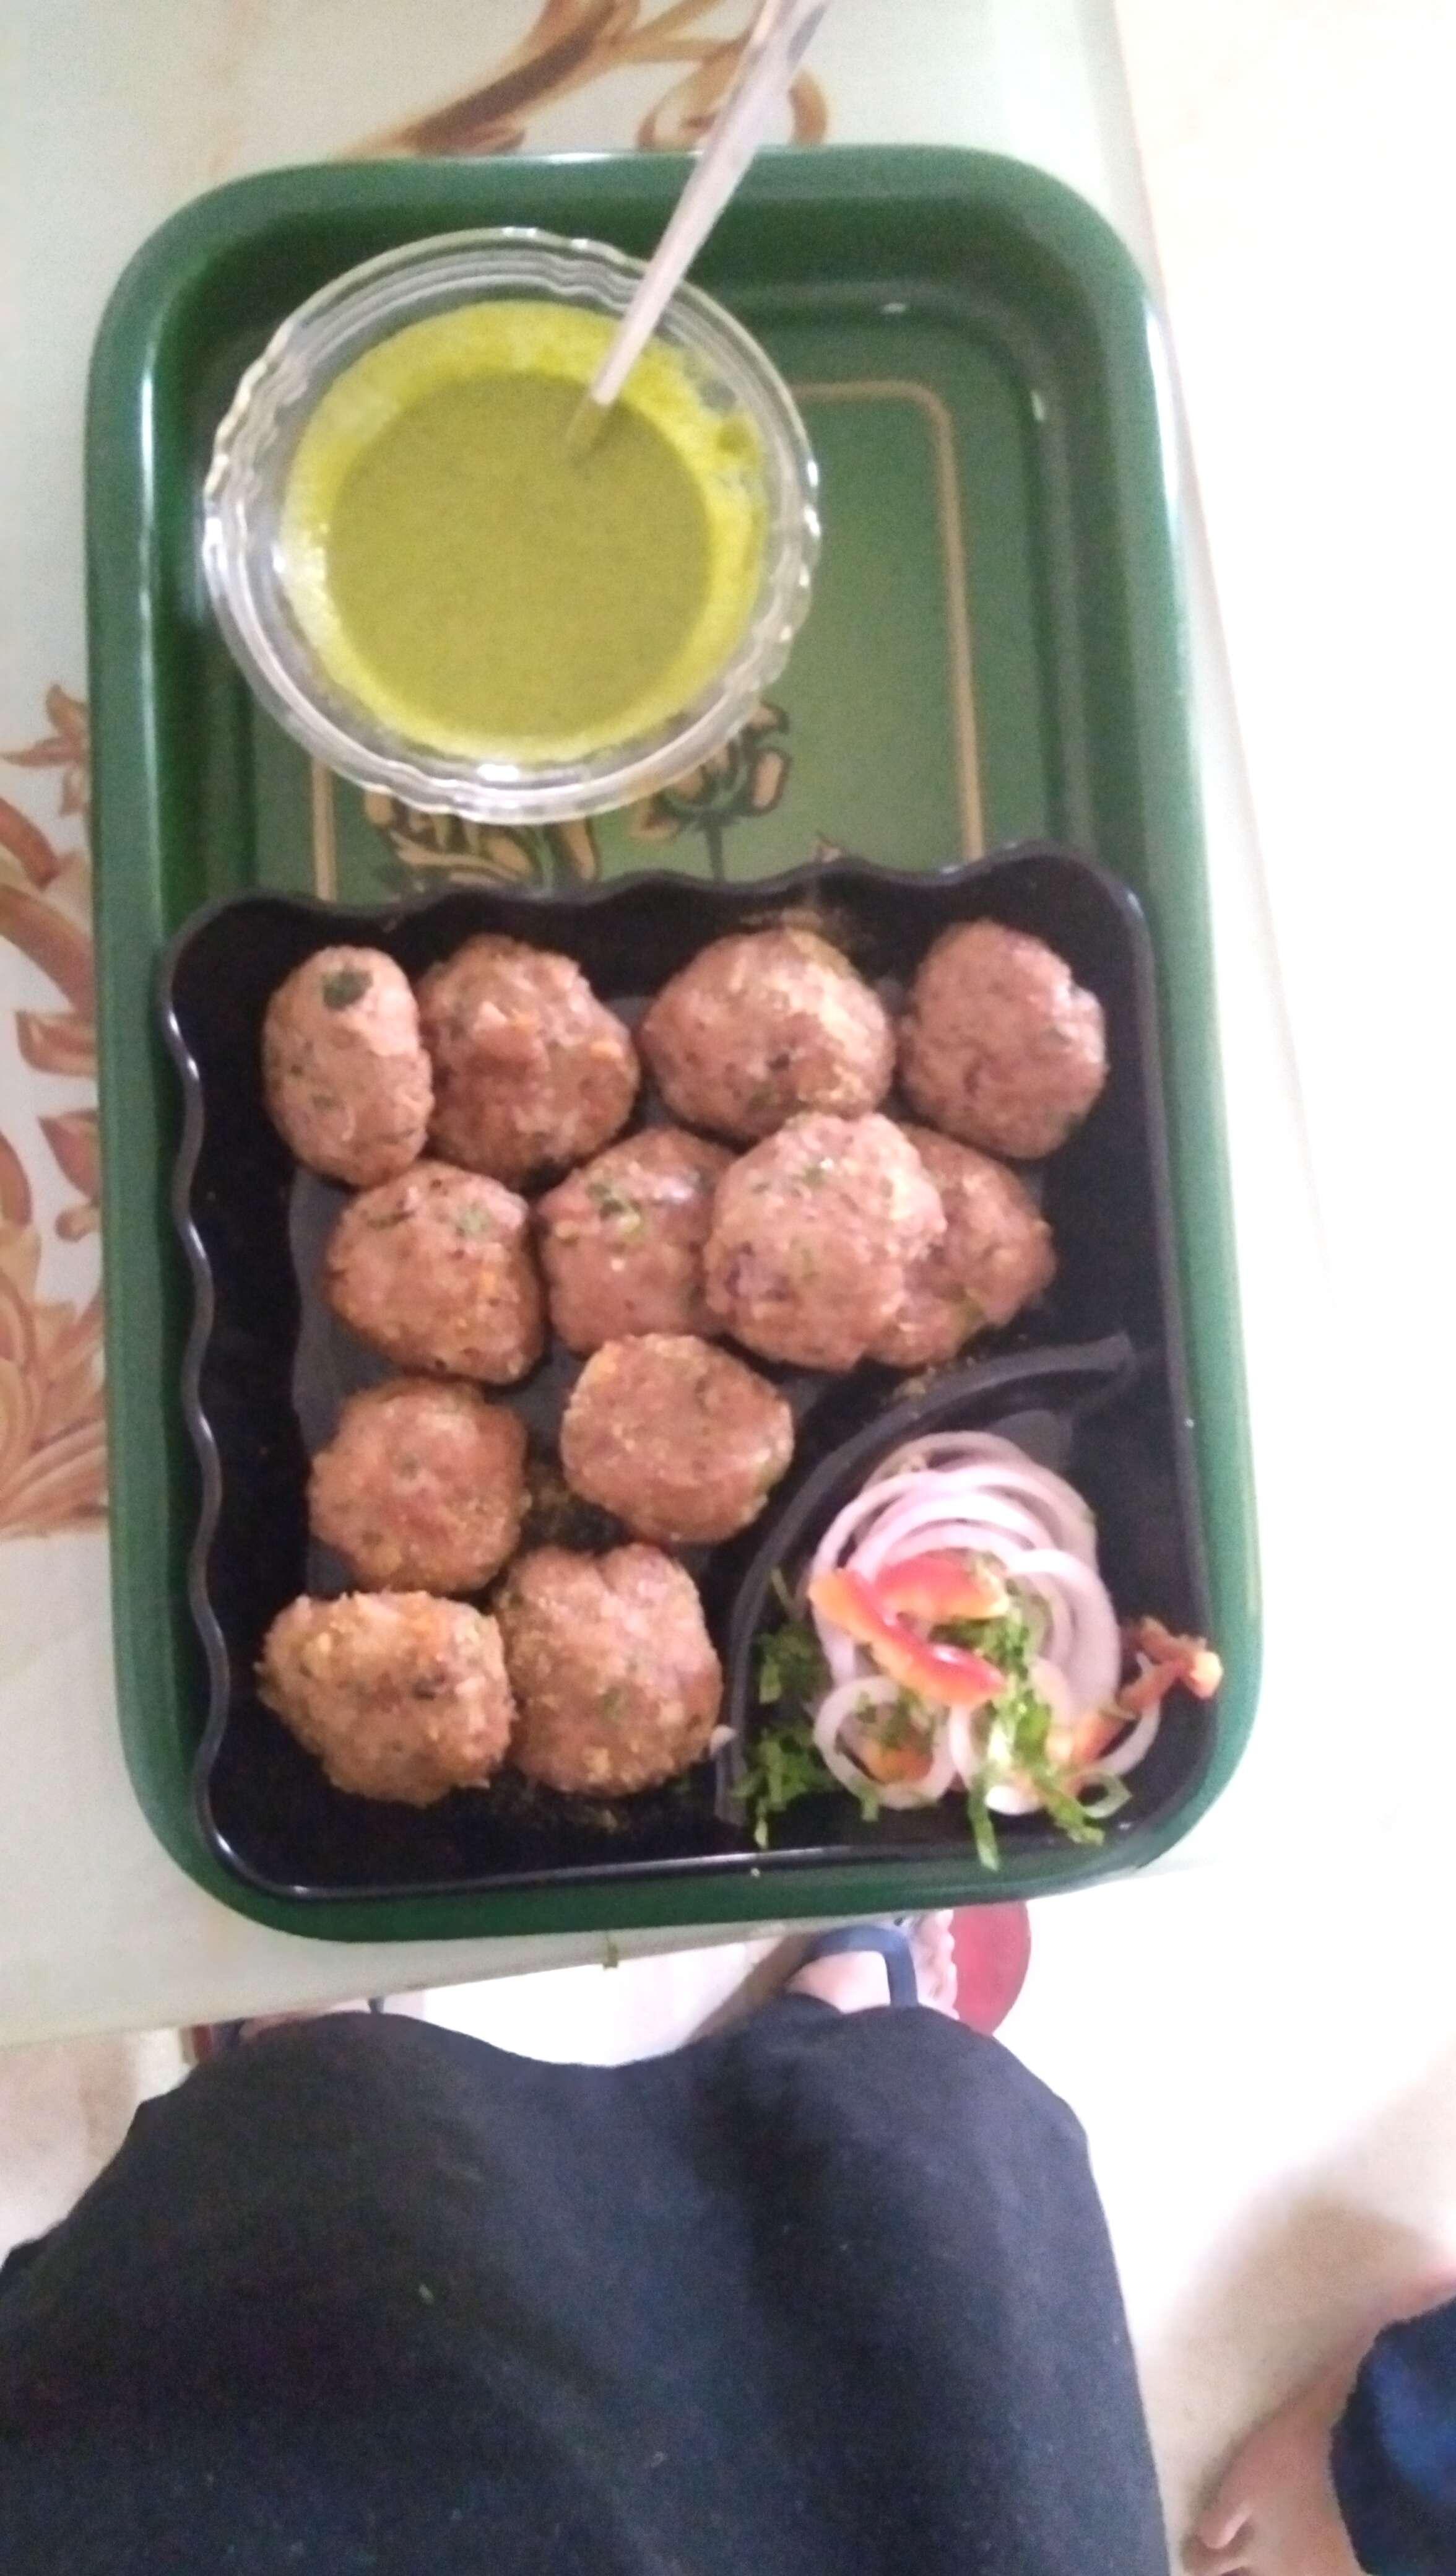 Tasty Mutton Galouti Kebab cooked by COOX chefs cooks during occasions parties events at home